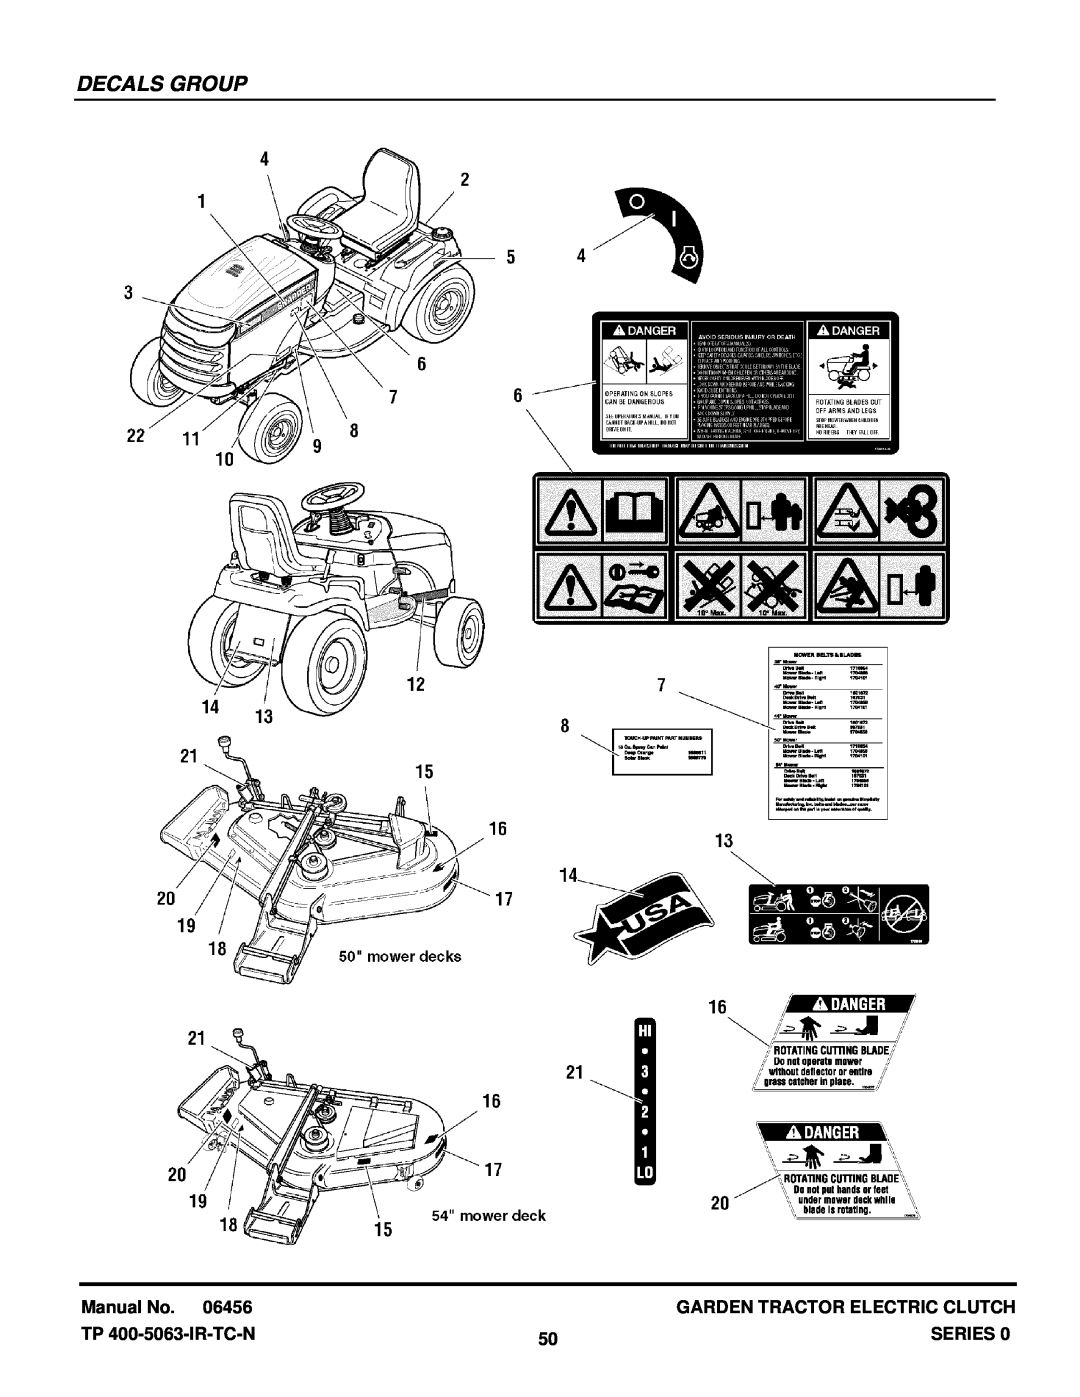 Snapper GT23540 manual Decals Group, Manual No, Garden Tractor Electric Clutch, TP 400-5063-IR-TC-N, Series 